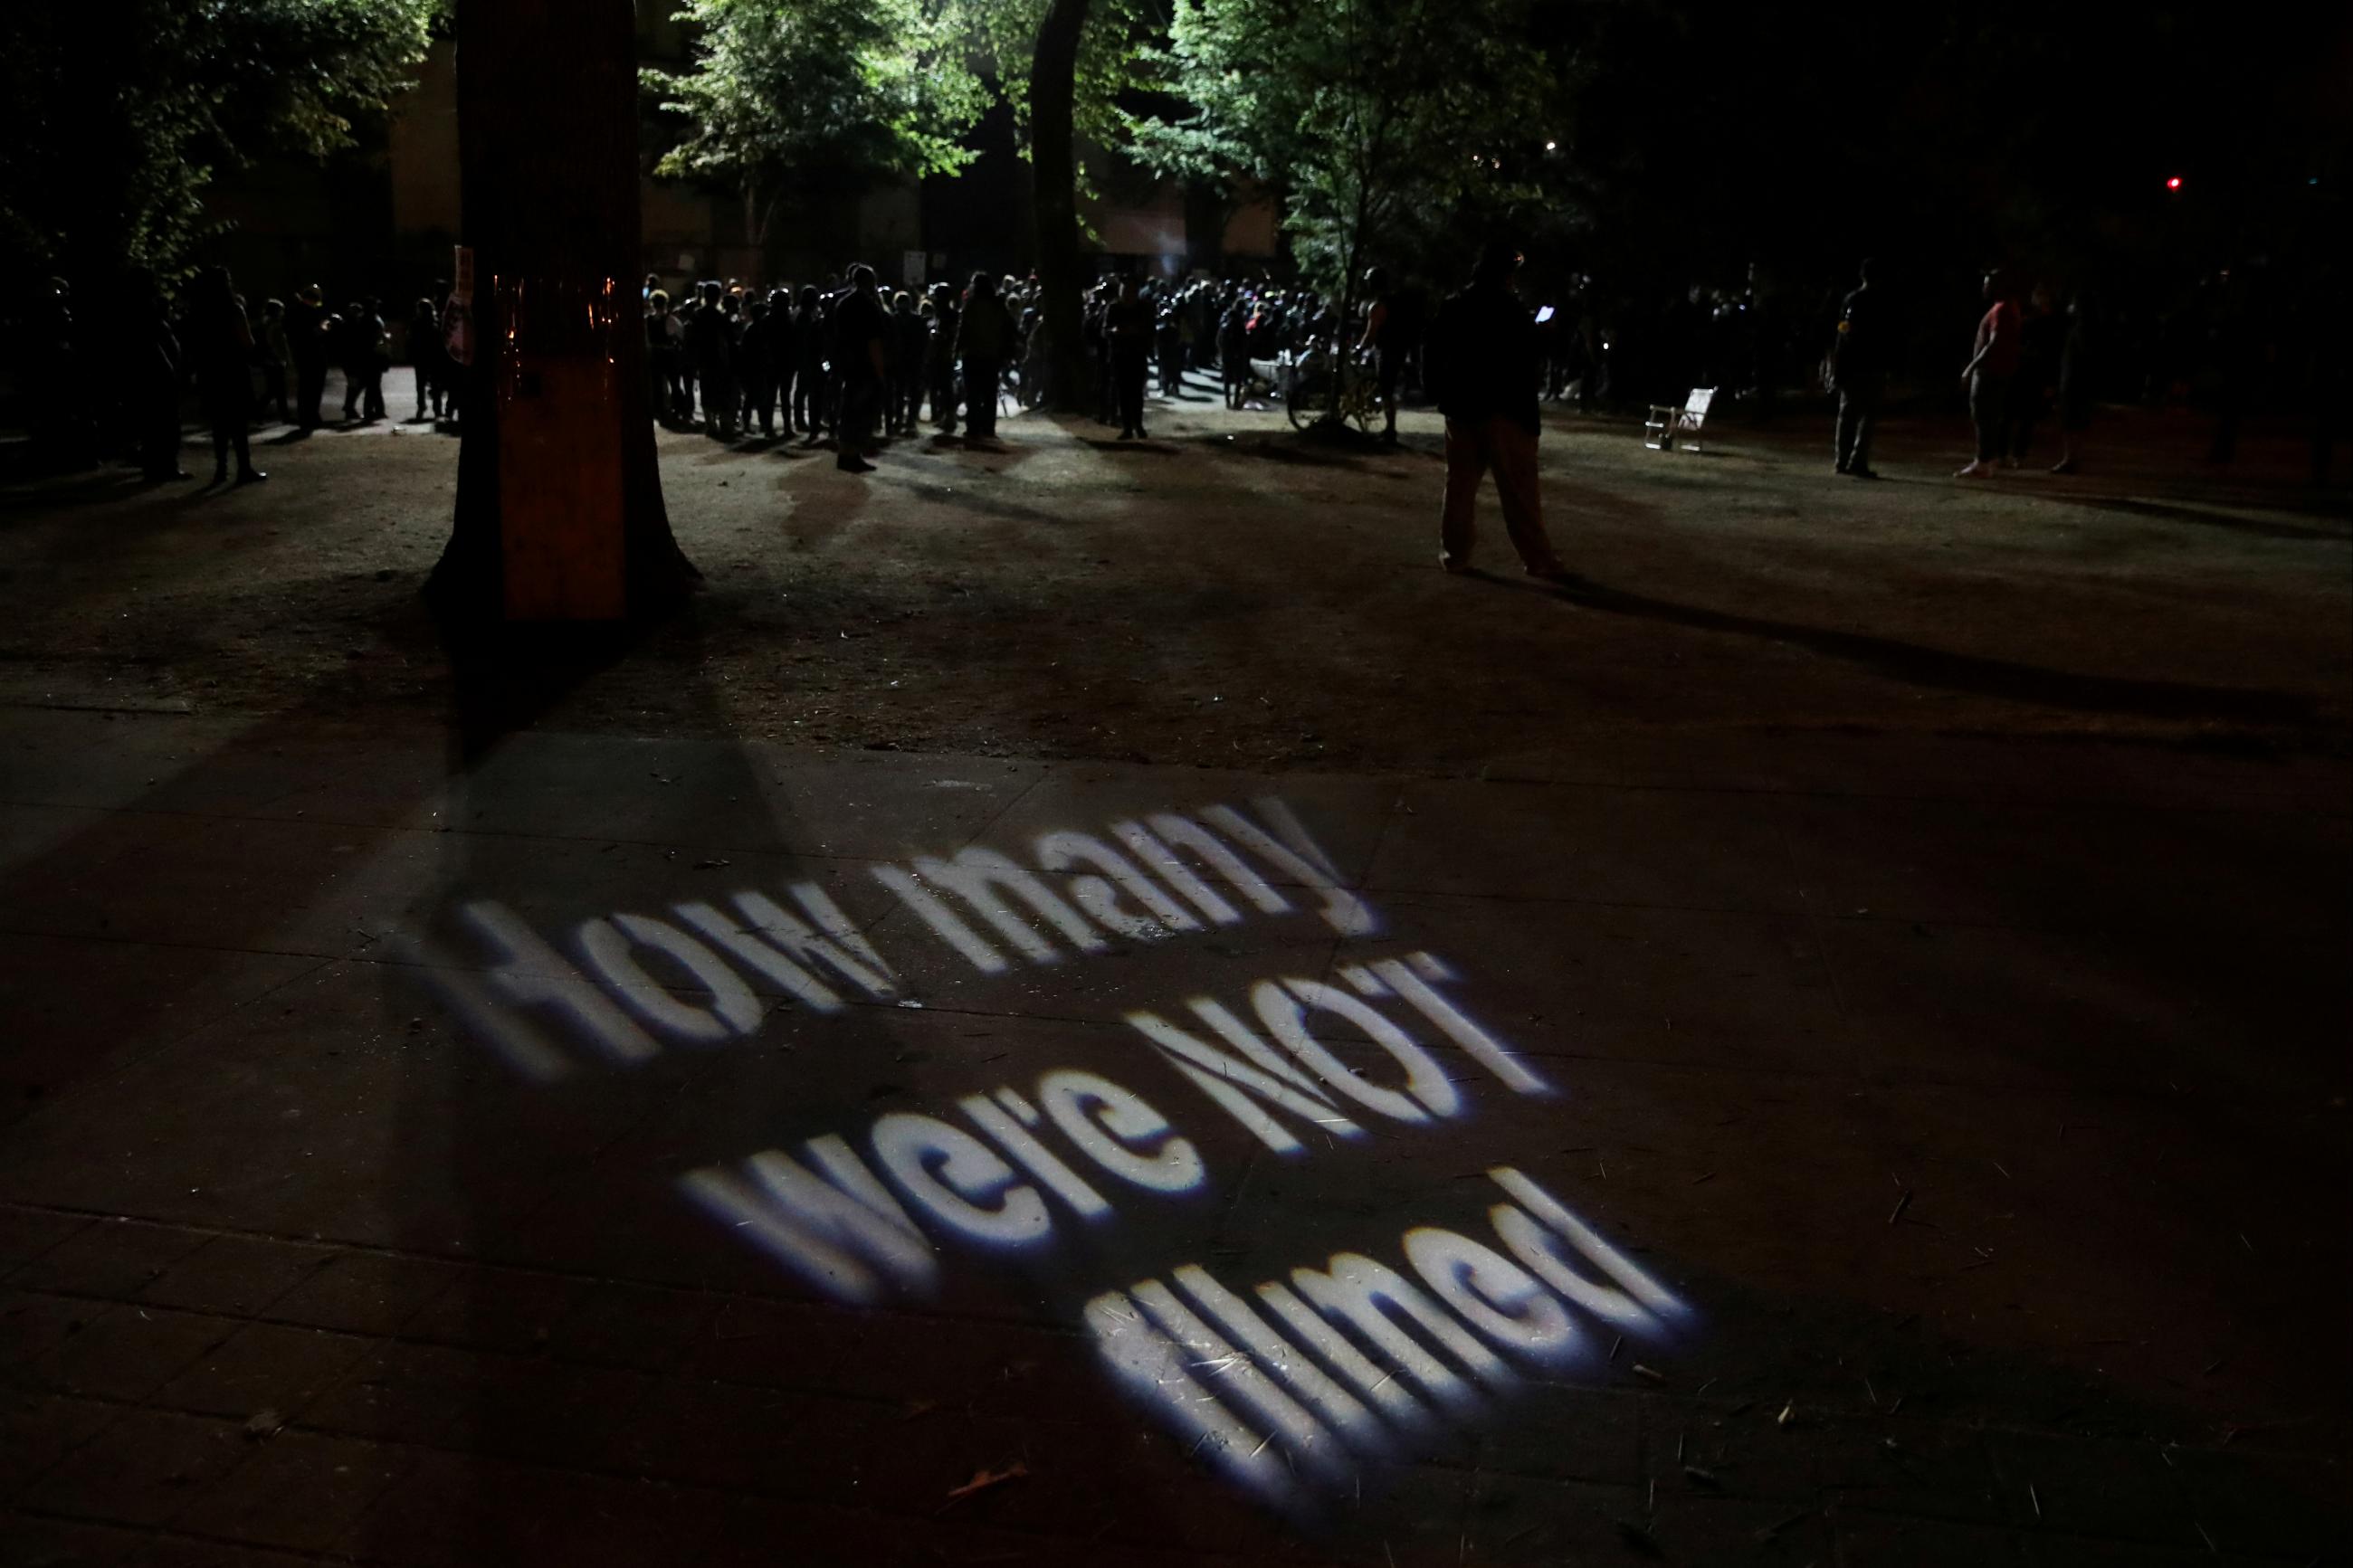 A protester casts a projection during a demonstration against police violence and racial inequality in Portland, Oregon, U.S., August 1, 2020. 